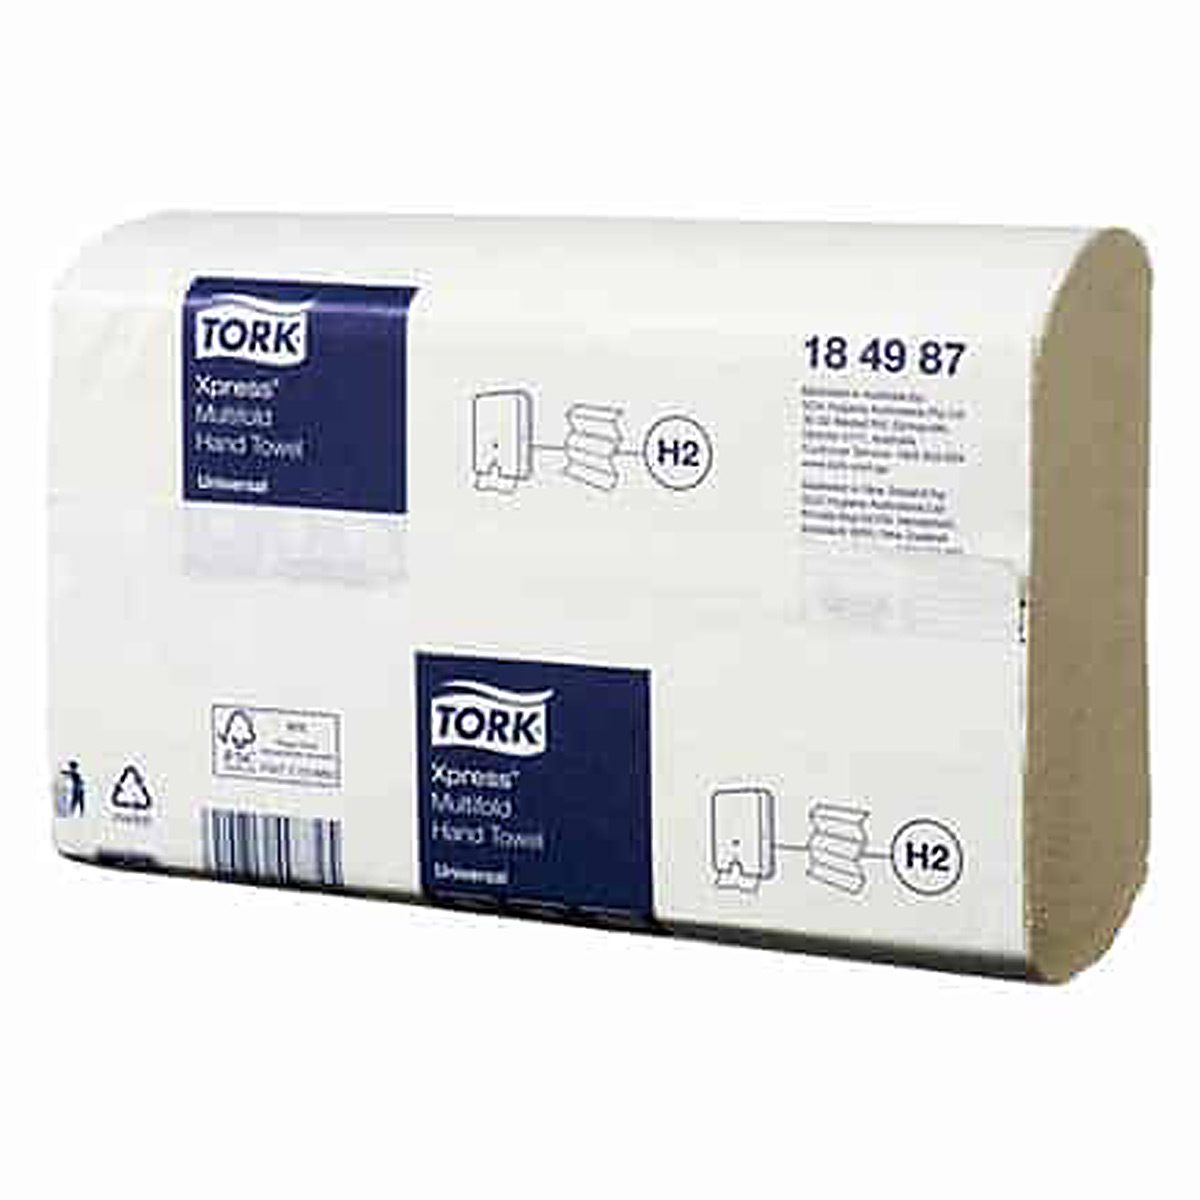 paper-products-paper-towels-tork-universal-xpress-multi-fold-slim-towel-1-ply-230-sheets-21-packs-h2-soft-strong-absorbent-washrooms-hospitality-toilets-healthcare-facilities-vjs-distributors-184987